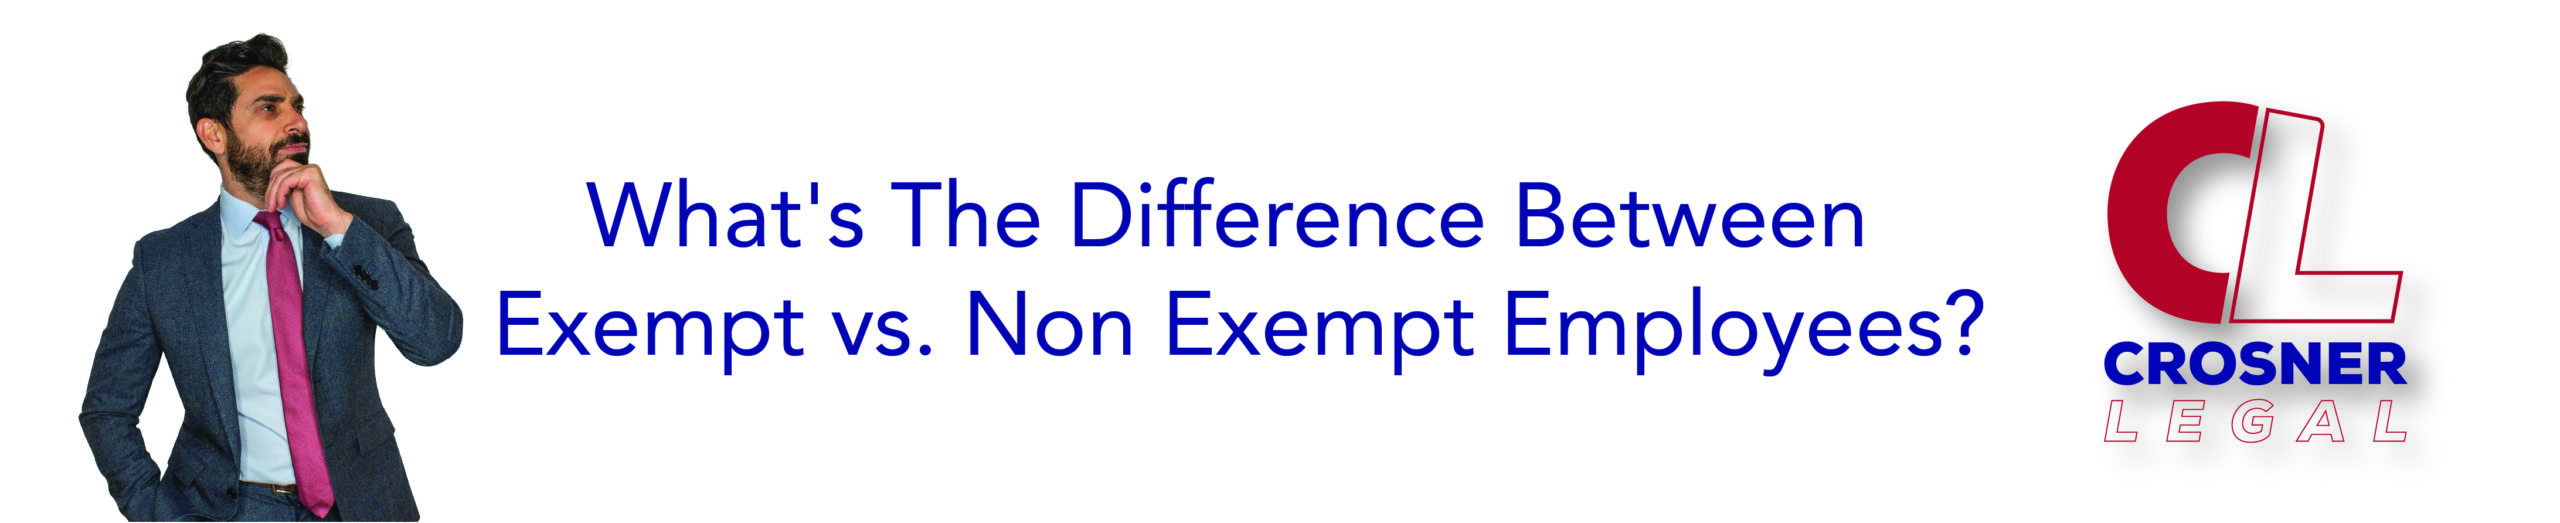 What’s The Difference Between Exempt vs. Non Exempt Employees?